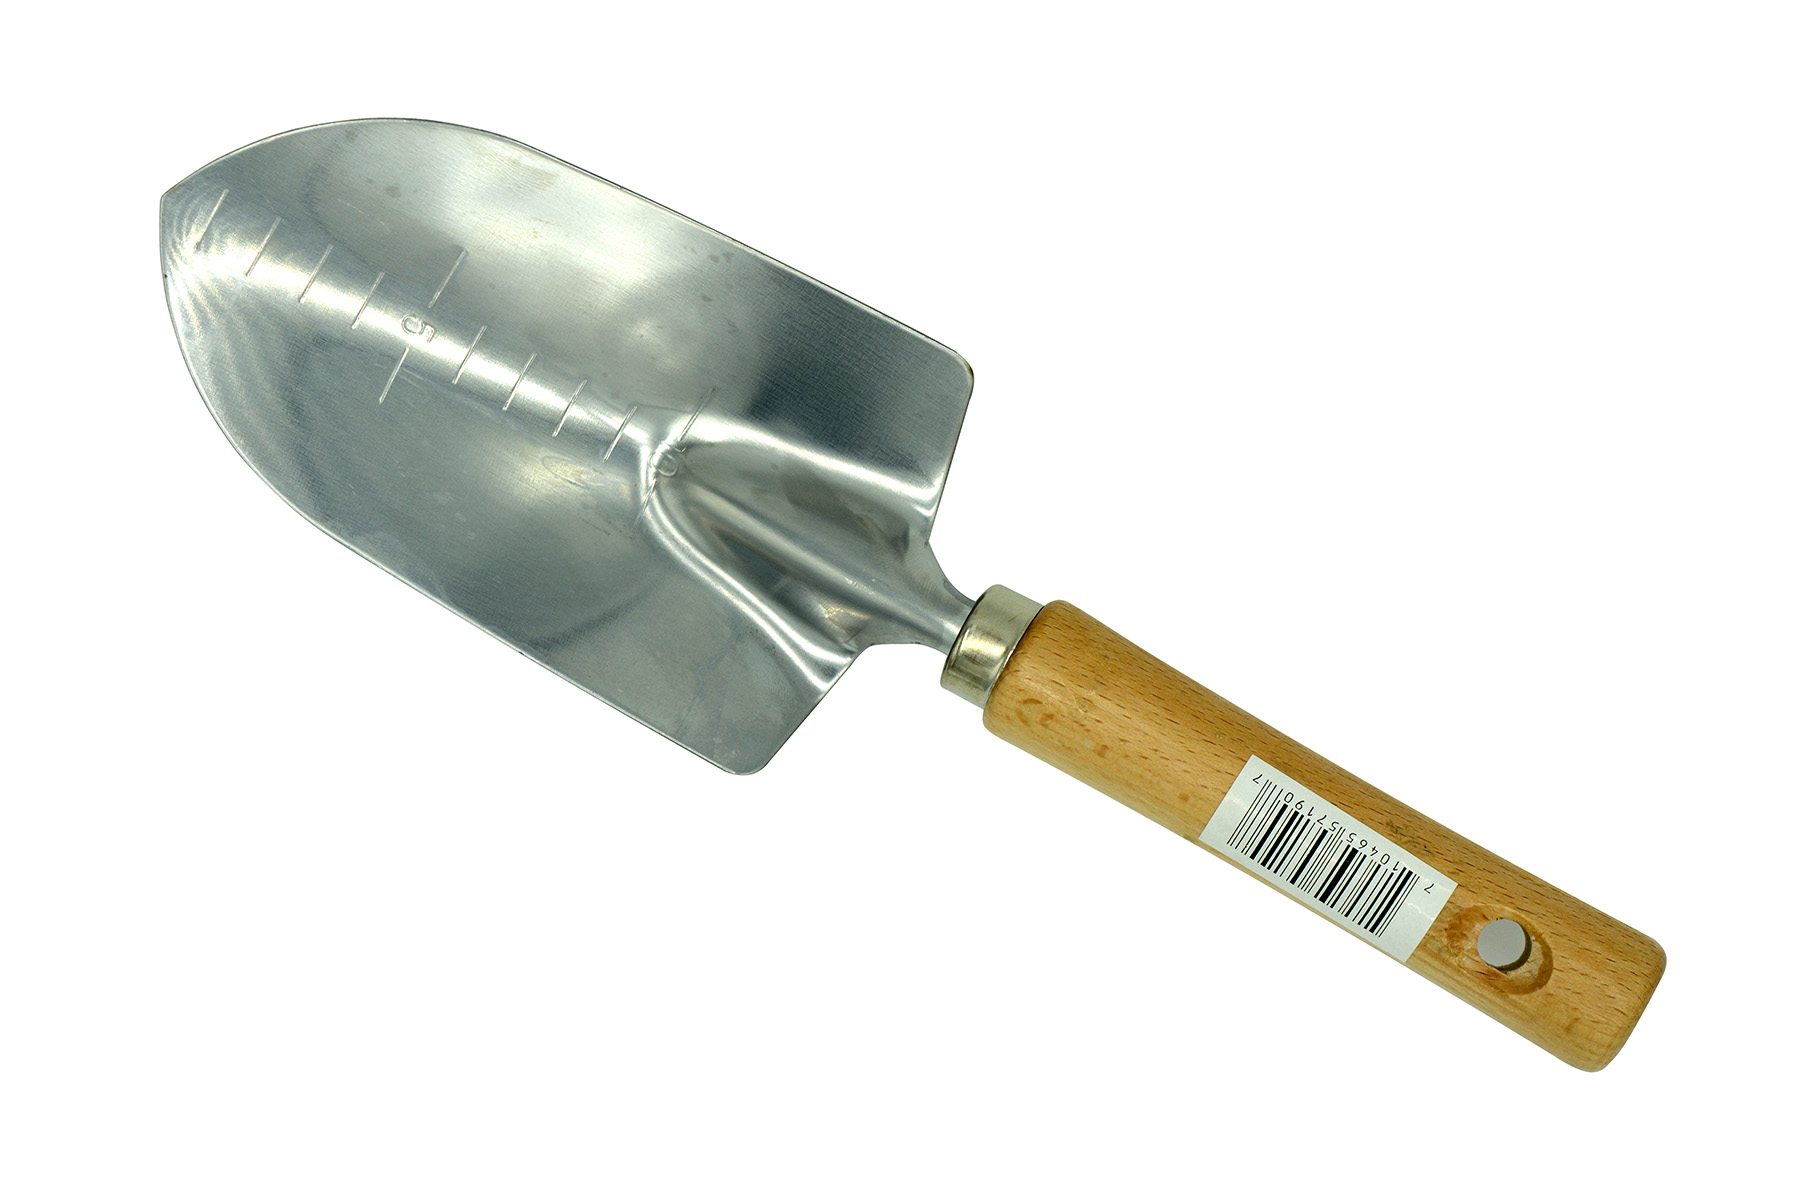 Zenport Economy Planting Trowel 15308L: A Durable and Affordable Tool for Gardening Enthusiasts